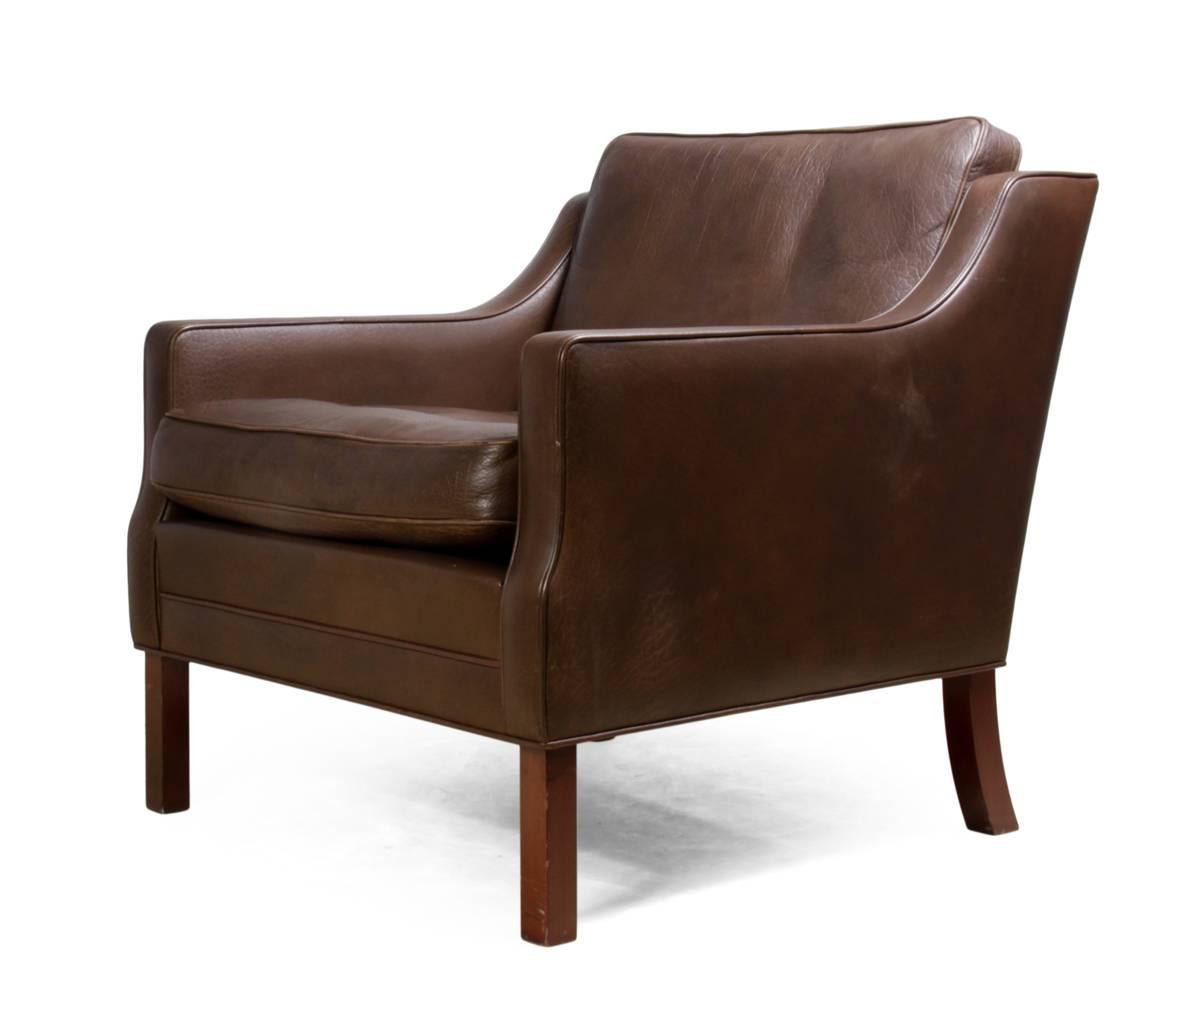 Danish leather armchair, circa 1960
A good heavy quality Børge Mogensen style armchair produced in Denmark in the 1960s in excellent condition with no damage or old repairs to the leather
Age: 1960
Style: Mid-Century Modern
Material:
Condition: